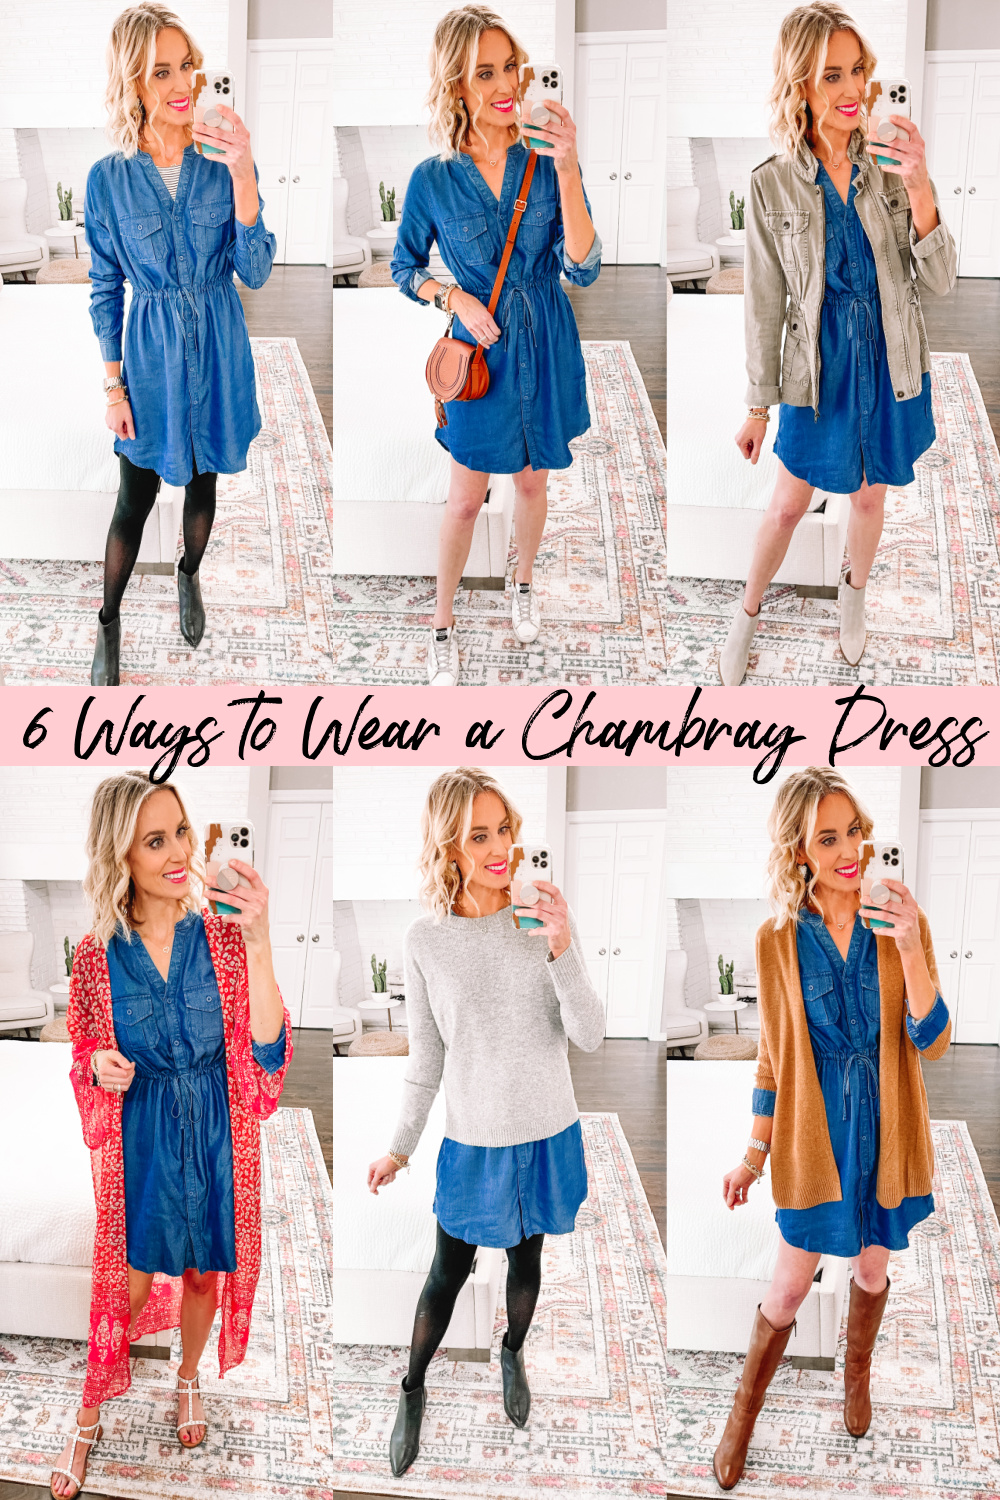 6 Ways to Wear a Chambray Dress - Straight A Style